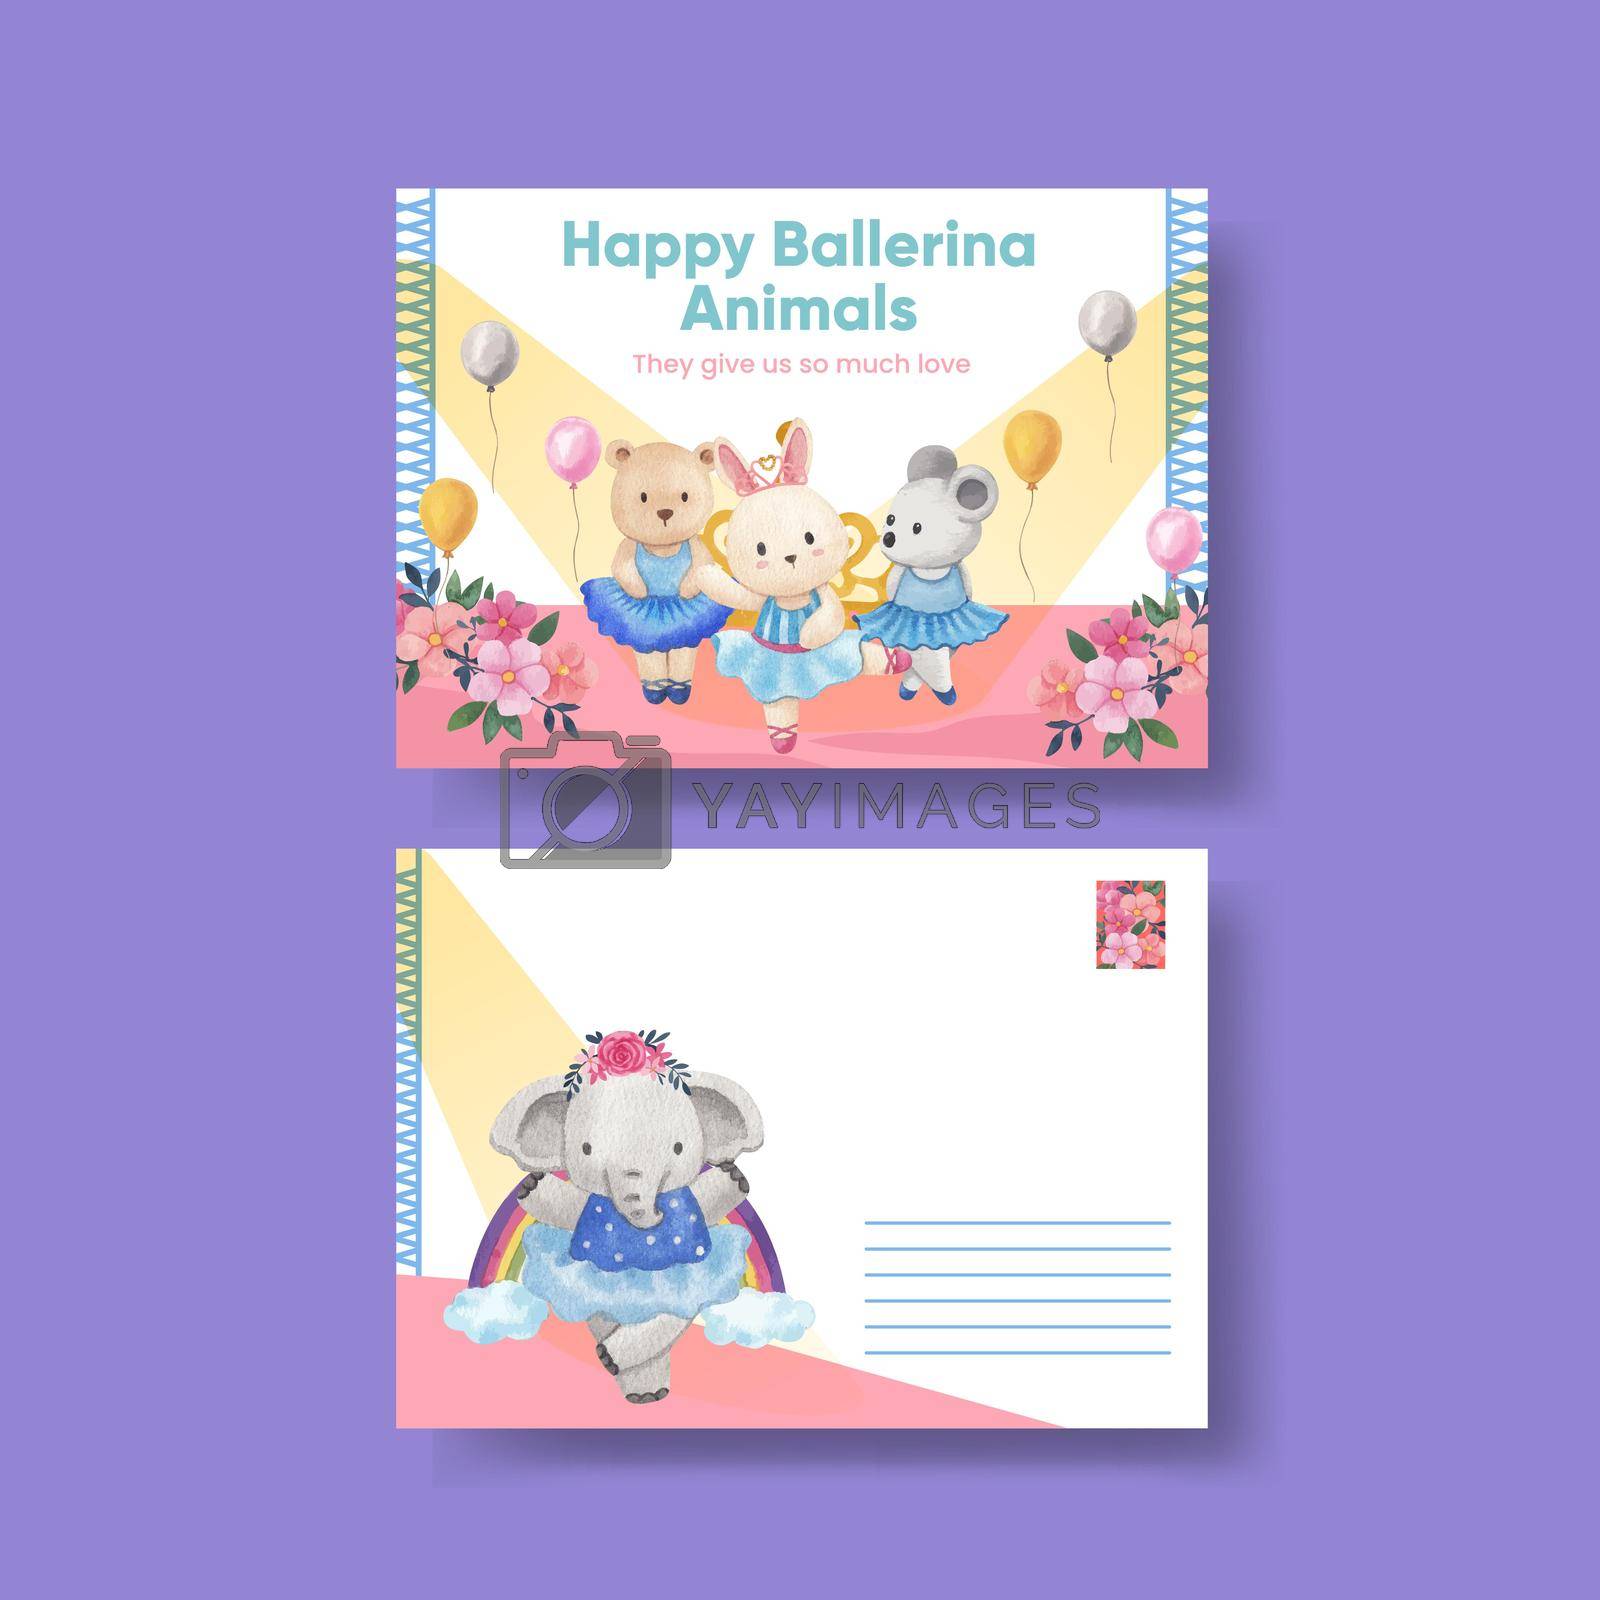 Postcard template with Fairy ballerinas animals concept,watercolor style
